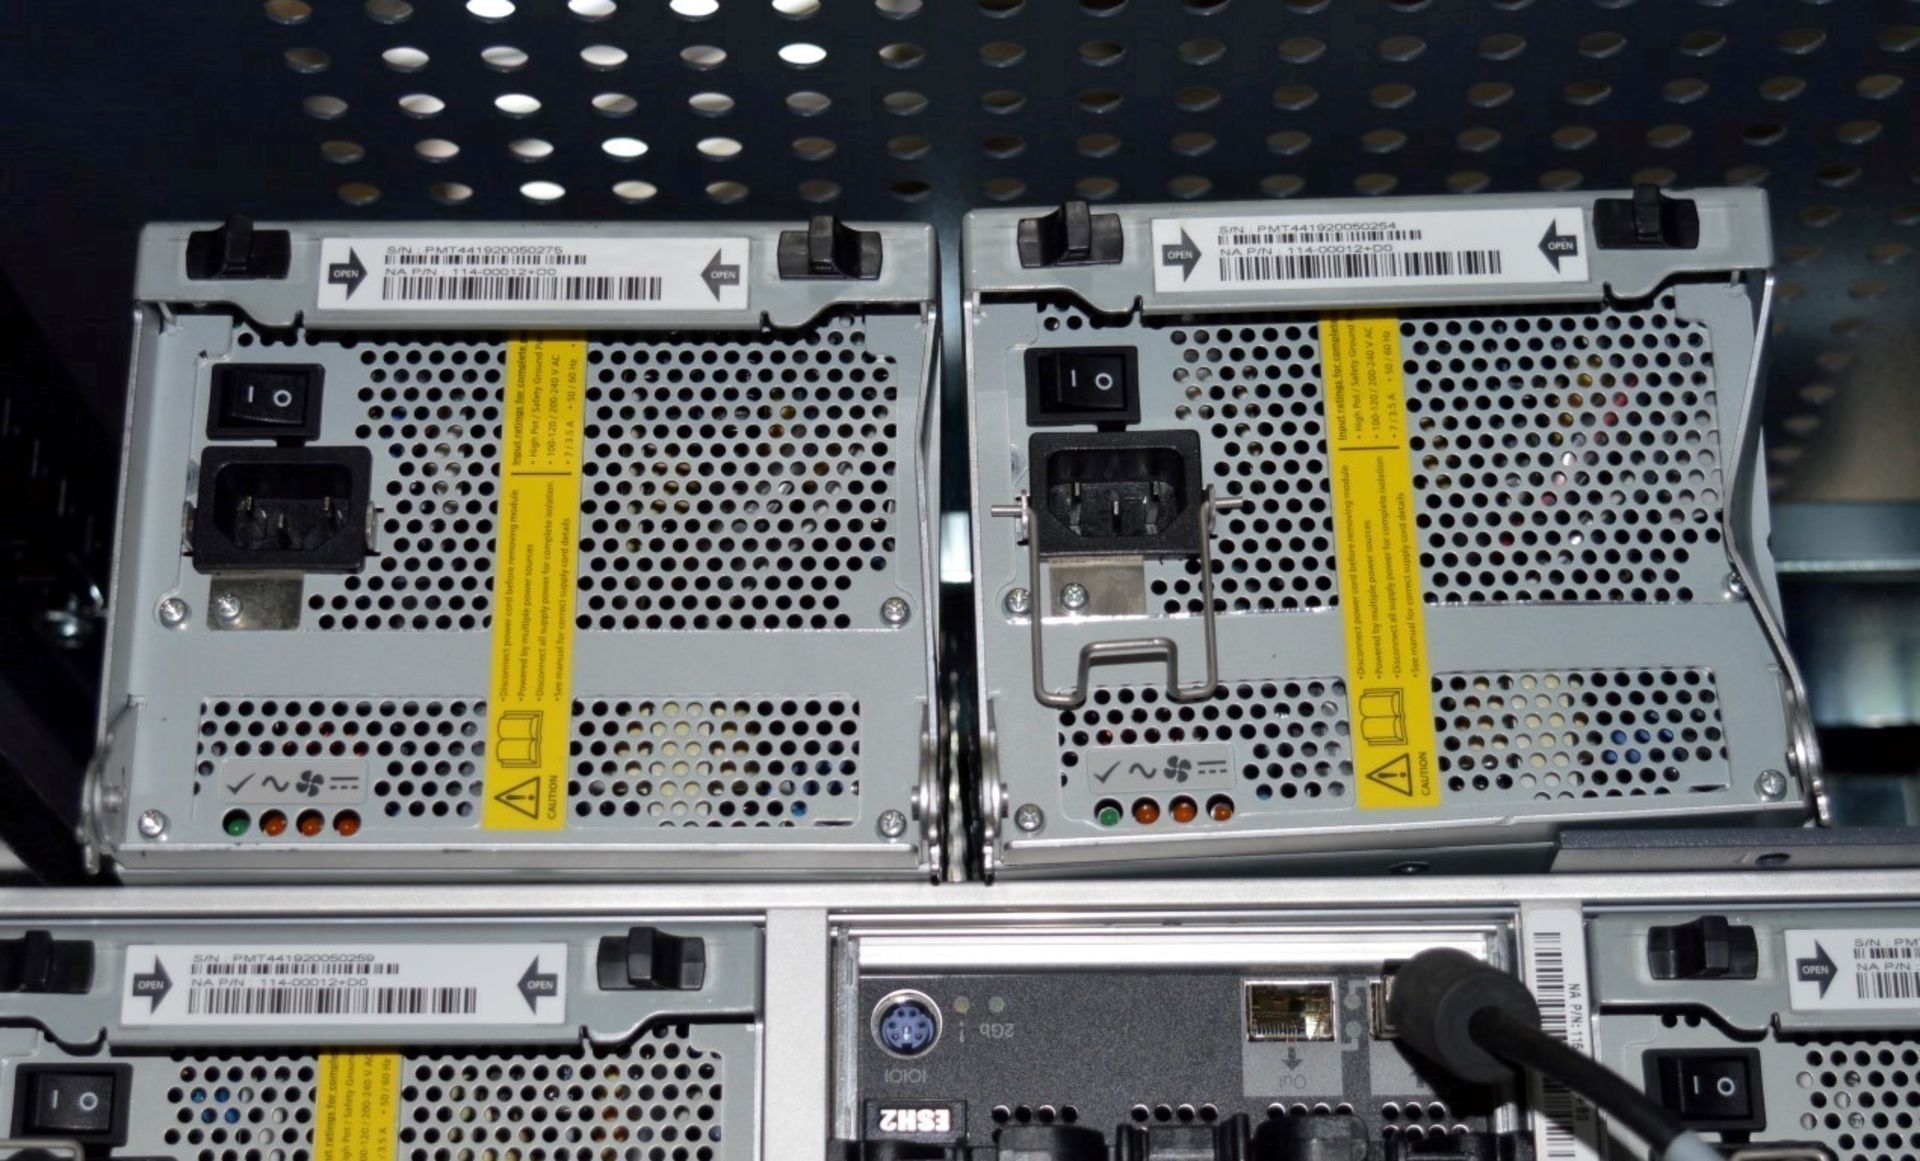 1 x Network Appliance Netapp Filer - Netapp Data Rack With 1 x FAS3140 Controller and 9 x DS14 MK2 - Image 23 of 23